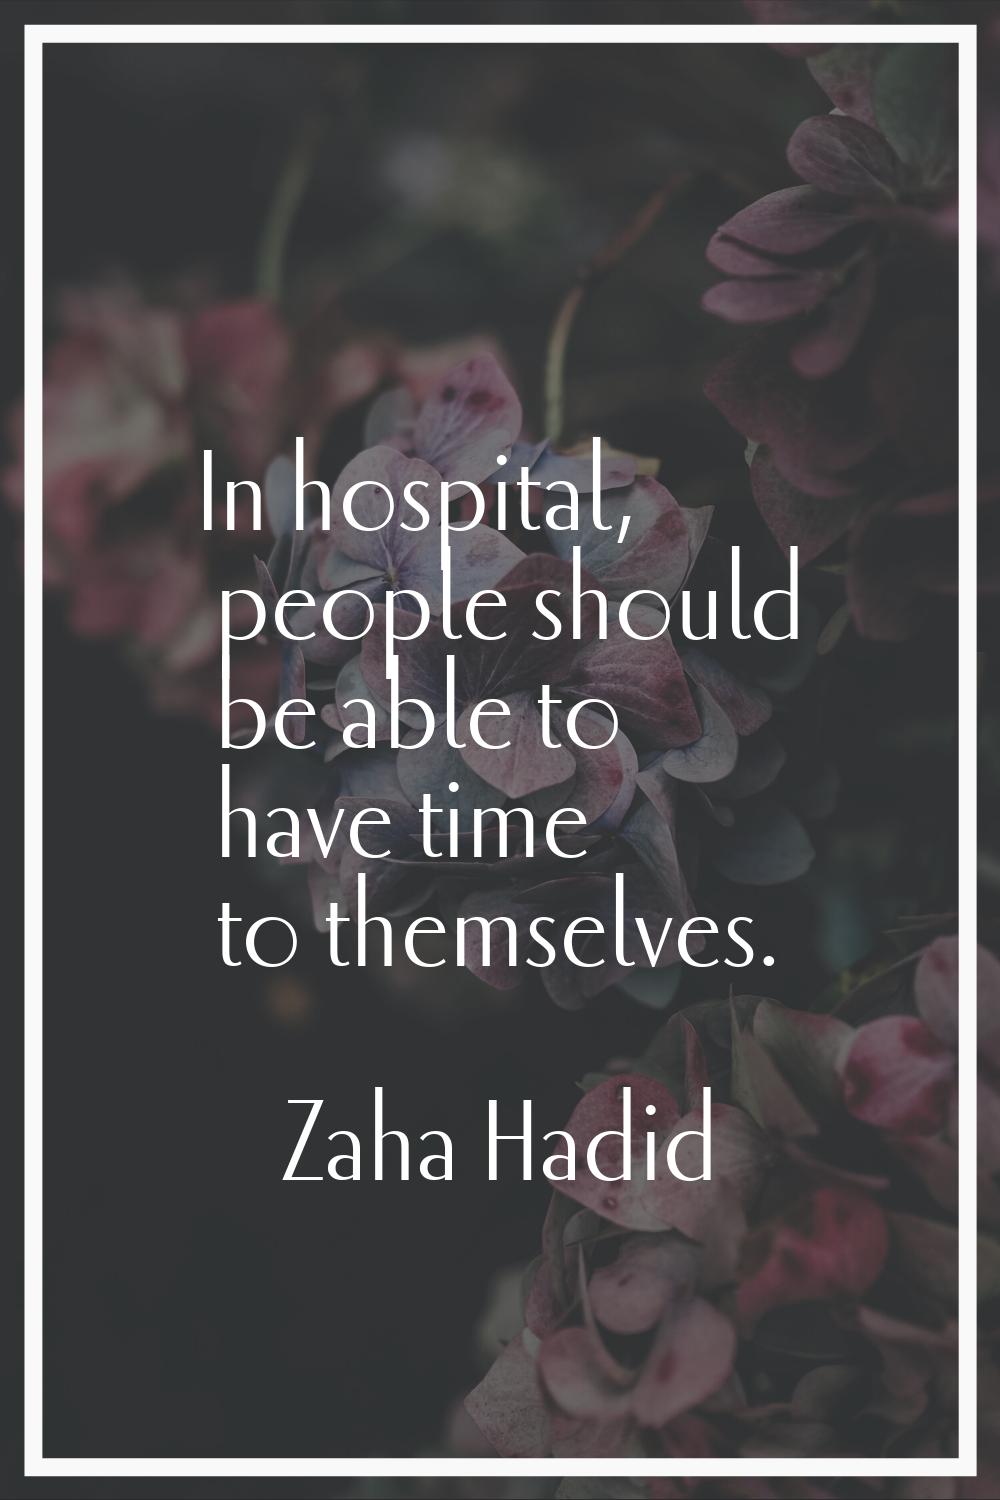 In hospital, people should be able to have time to themselves.